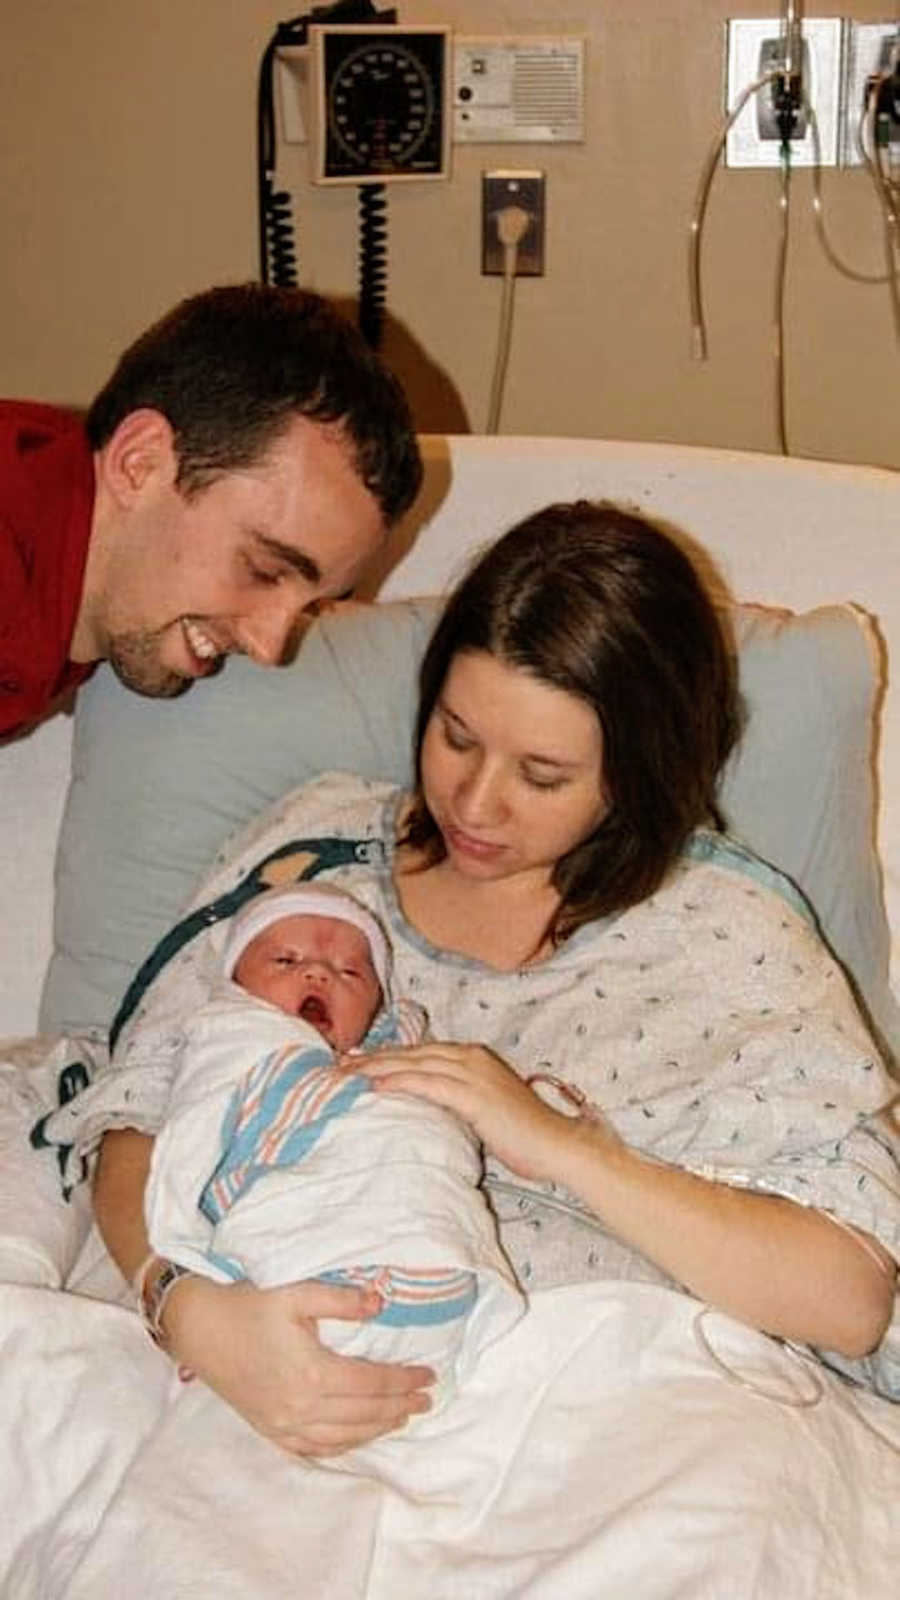 New father and new mother holding newborn baby in hospital bed